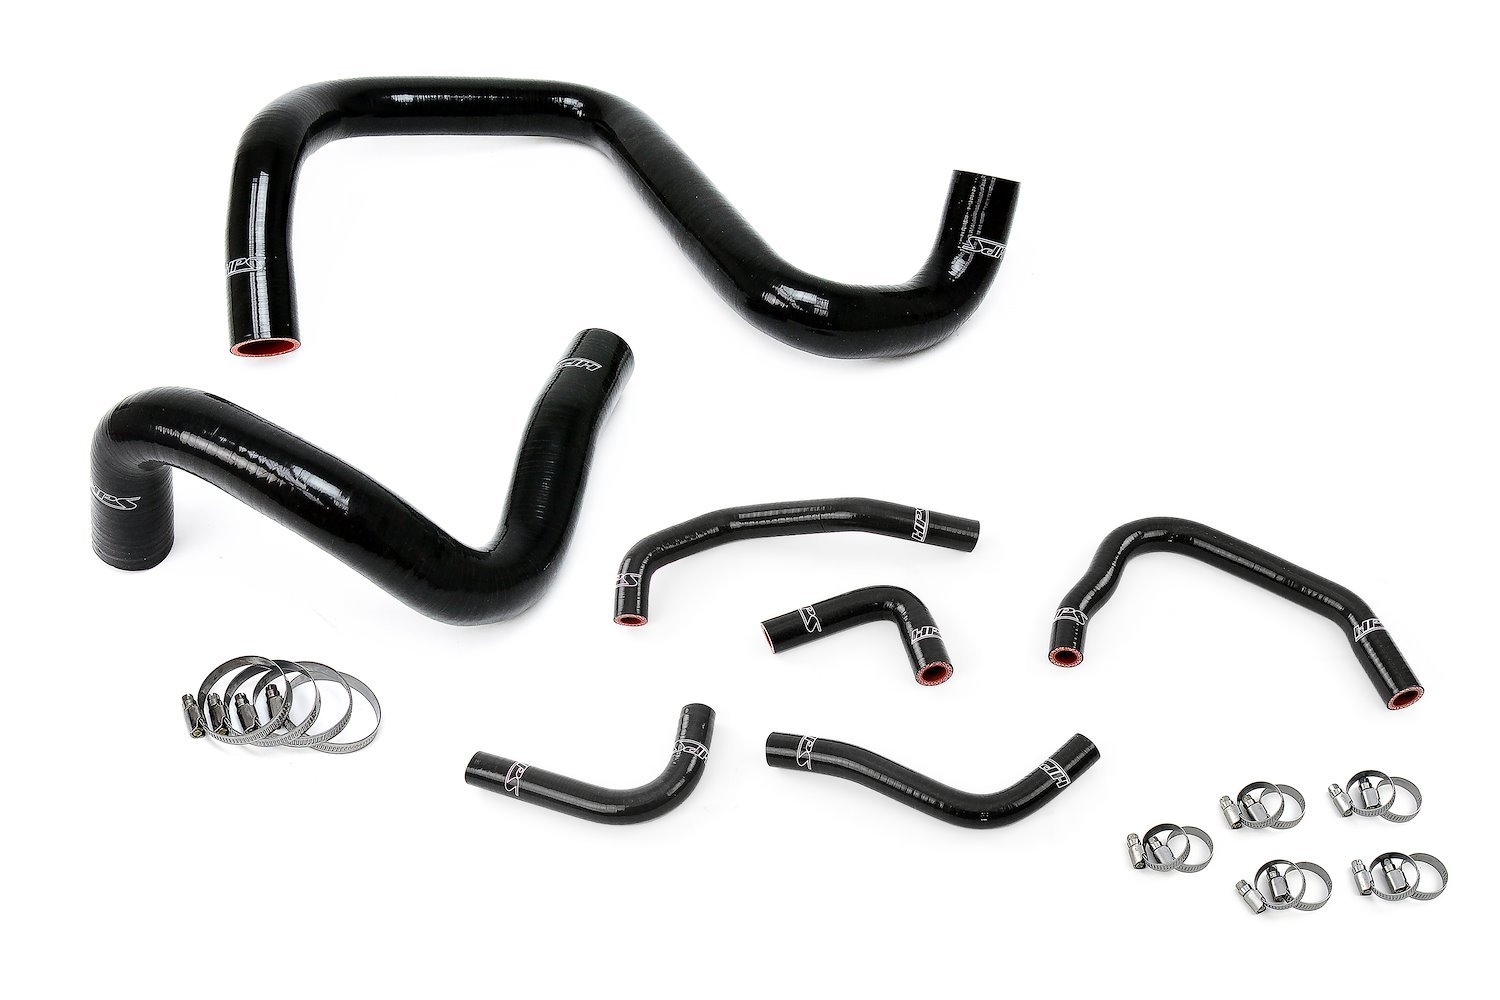 57-1285-BLK Coolant Hose Kit, High-Temp 3-Ply Reinforced Silicone, Replace Rubber Radiator Heater Coolant Hoses